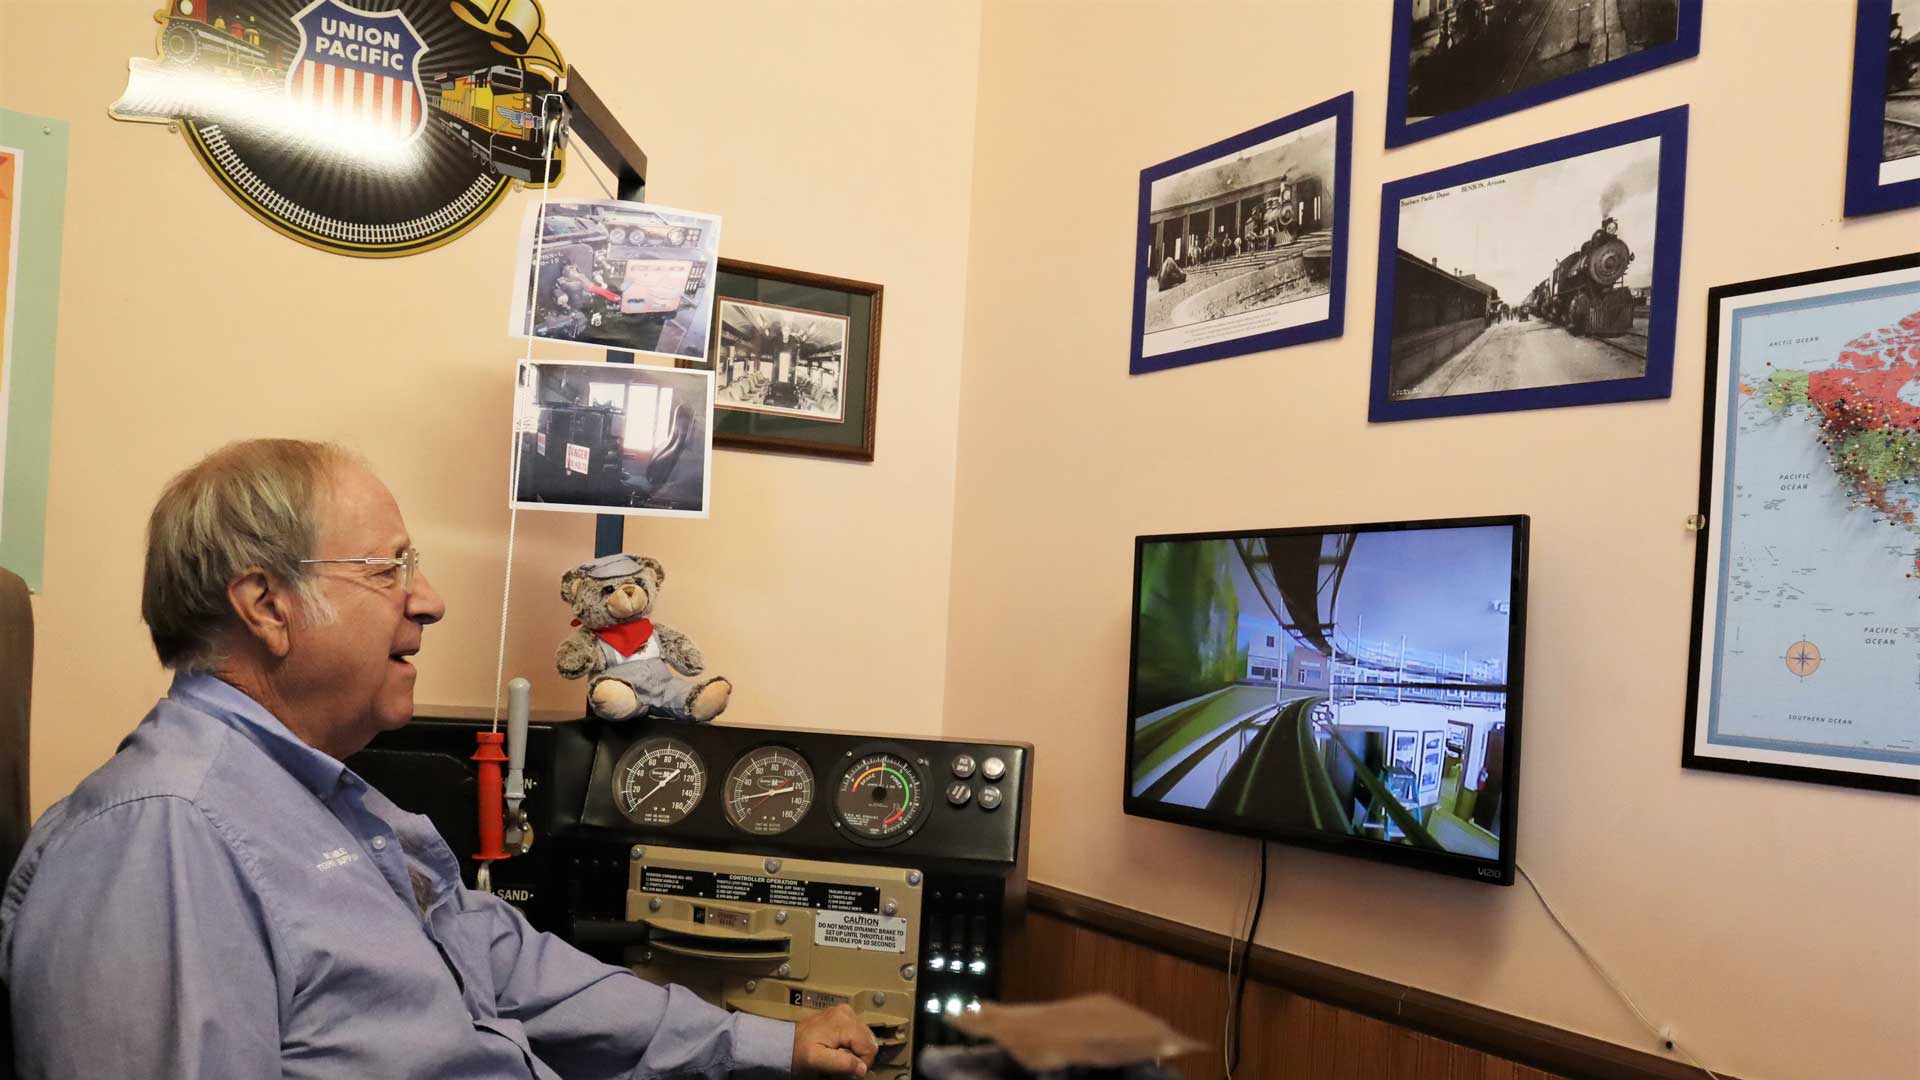 Bob Nilson, the Tourism Supervisor at the Benson Visitor’s Center, shows off the train simulator, which is a fan favorite at the visitor's center.